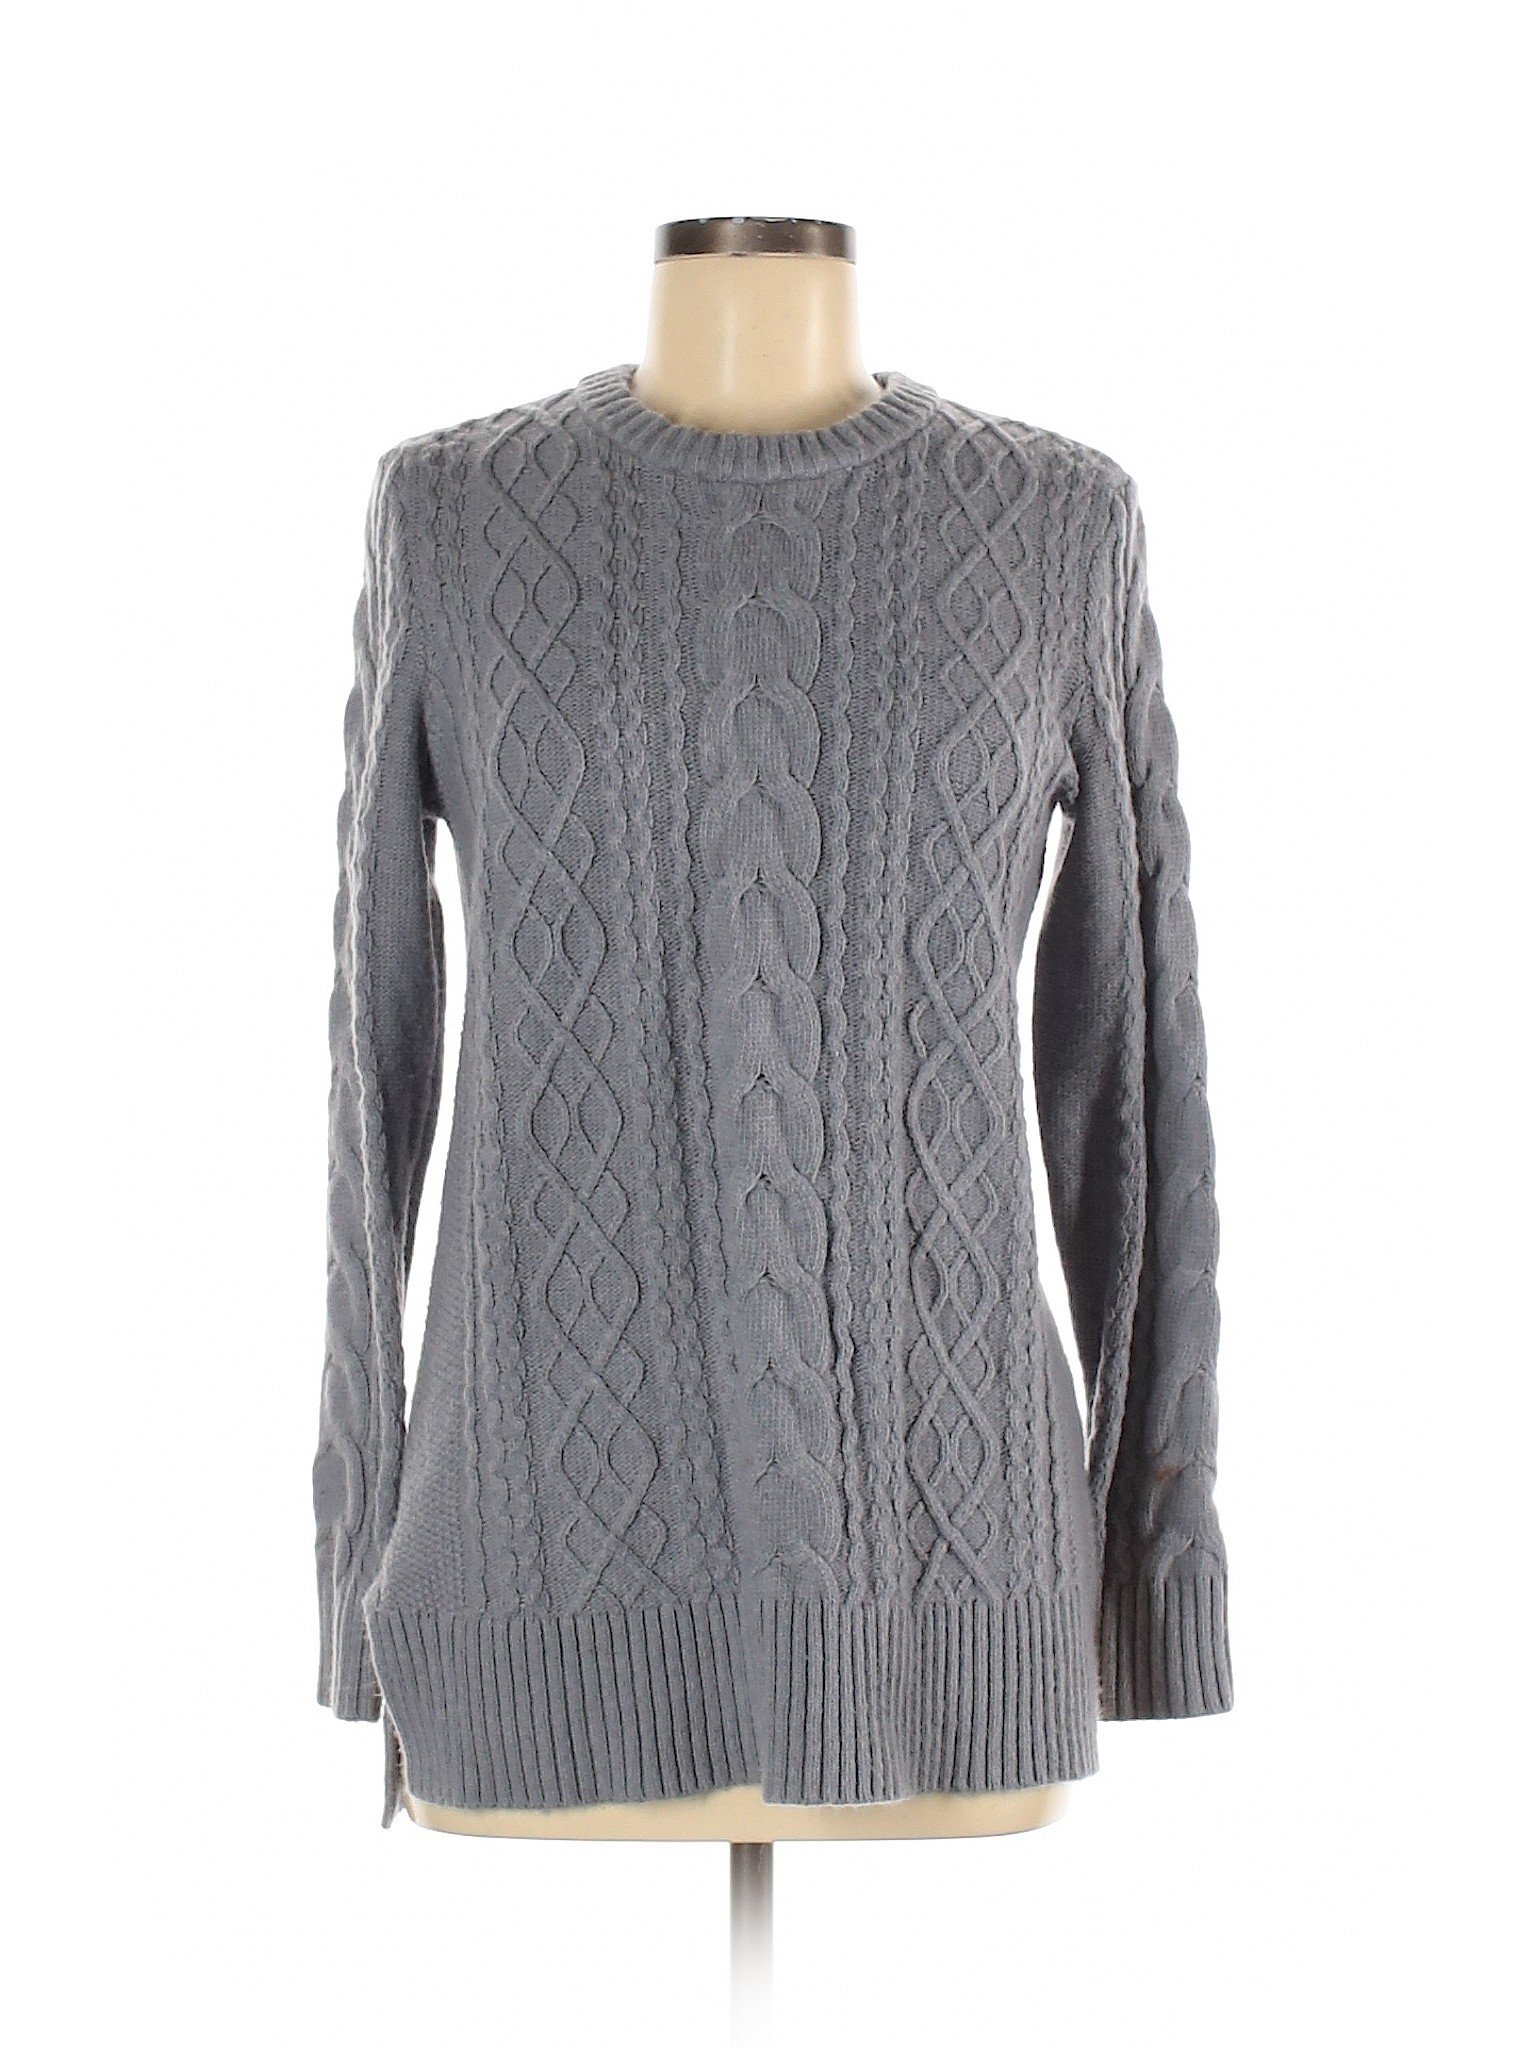 Lord & Taylor Women Gray Pullover Sweater M | eBay